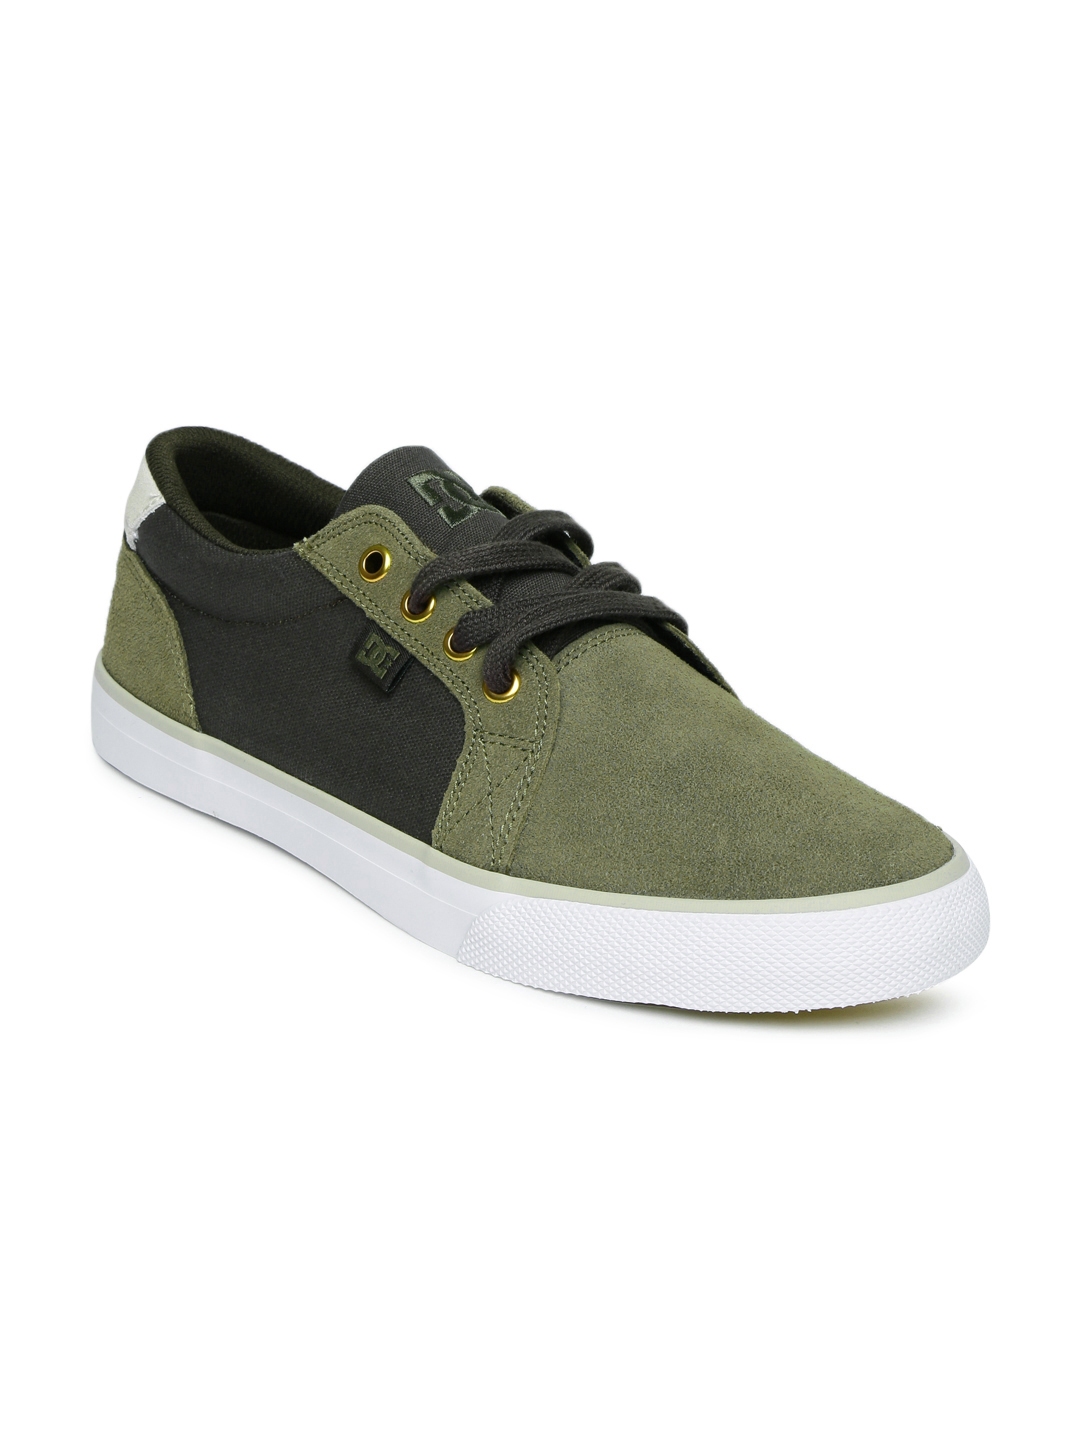 Buy DC Men Olive Green Sneakers - Casual Shoes for Men 1432656 | Myntra